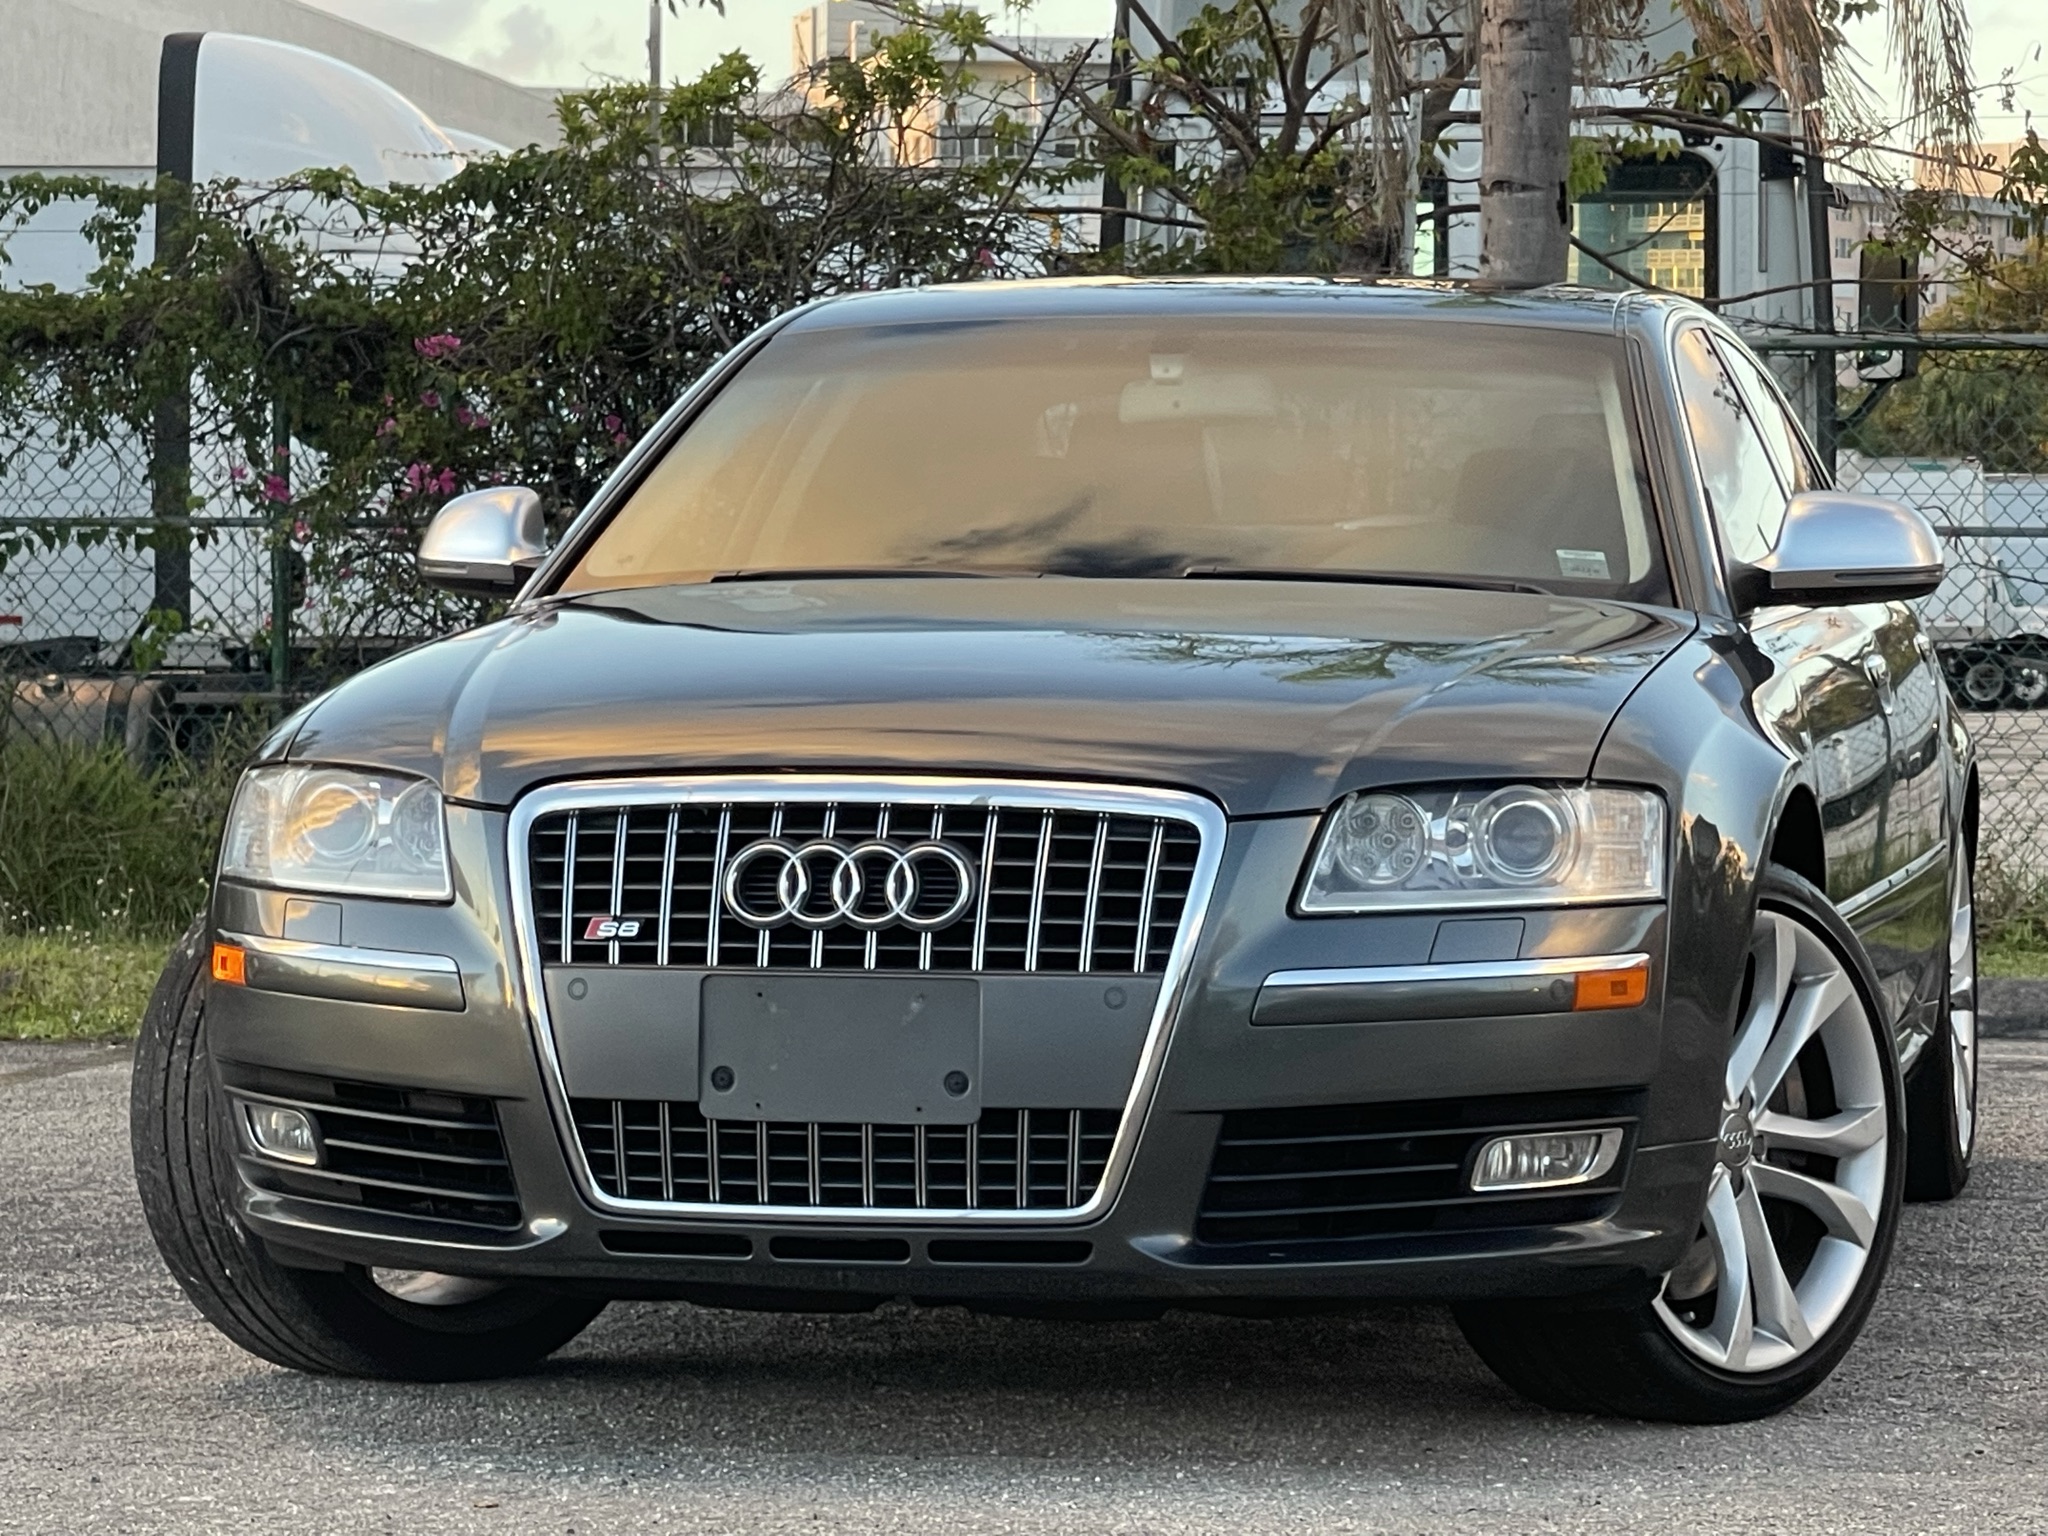 Buy Used 2008 AUDI S8 5.2 V10 QUATTRO for $25 900 from trusted dealer in  Brooklyn, NY!